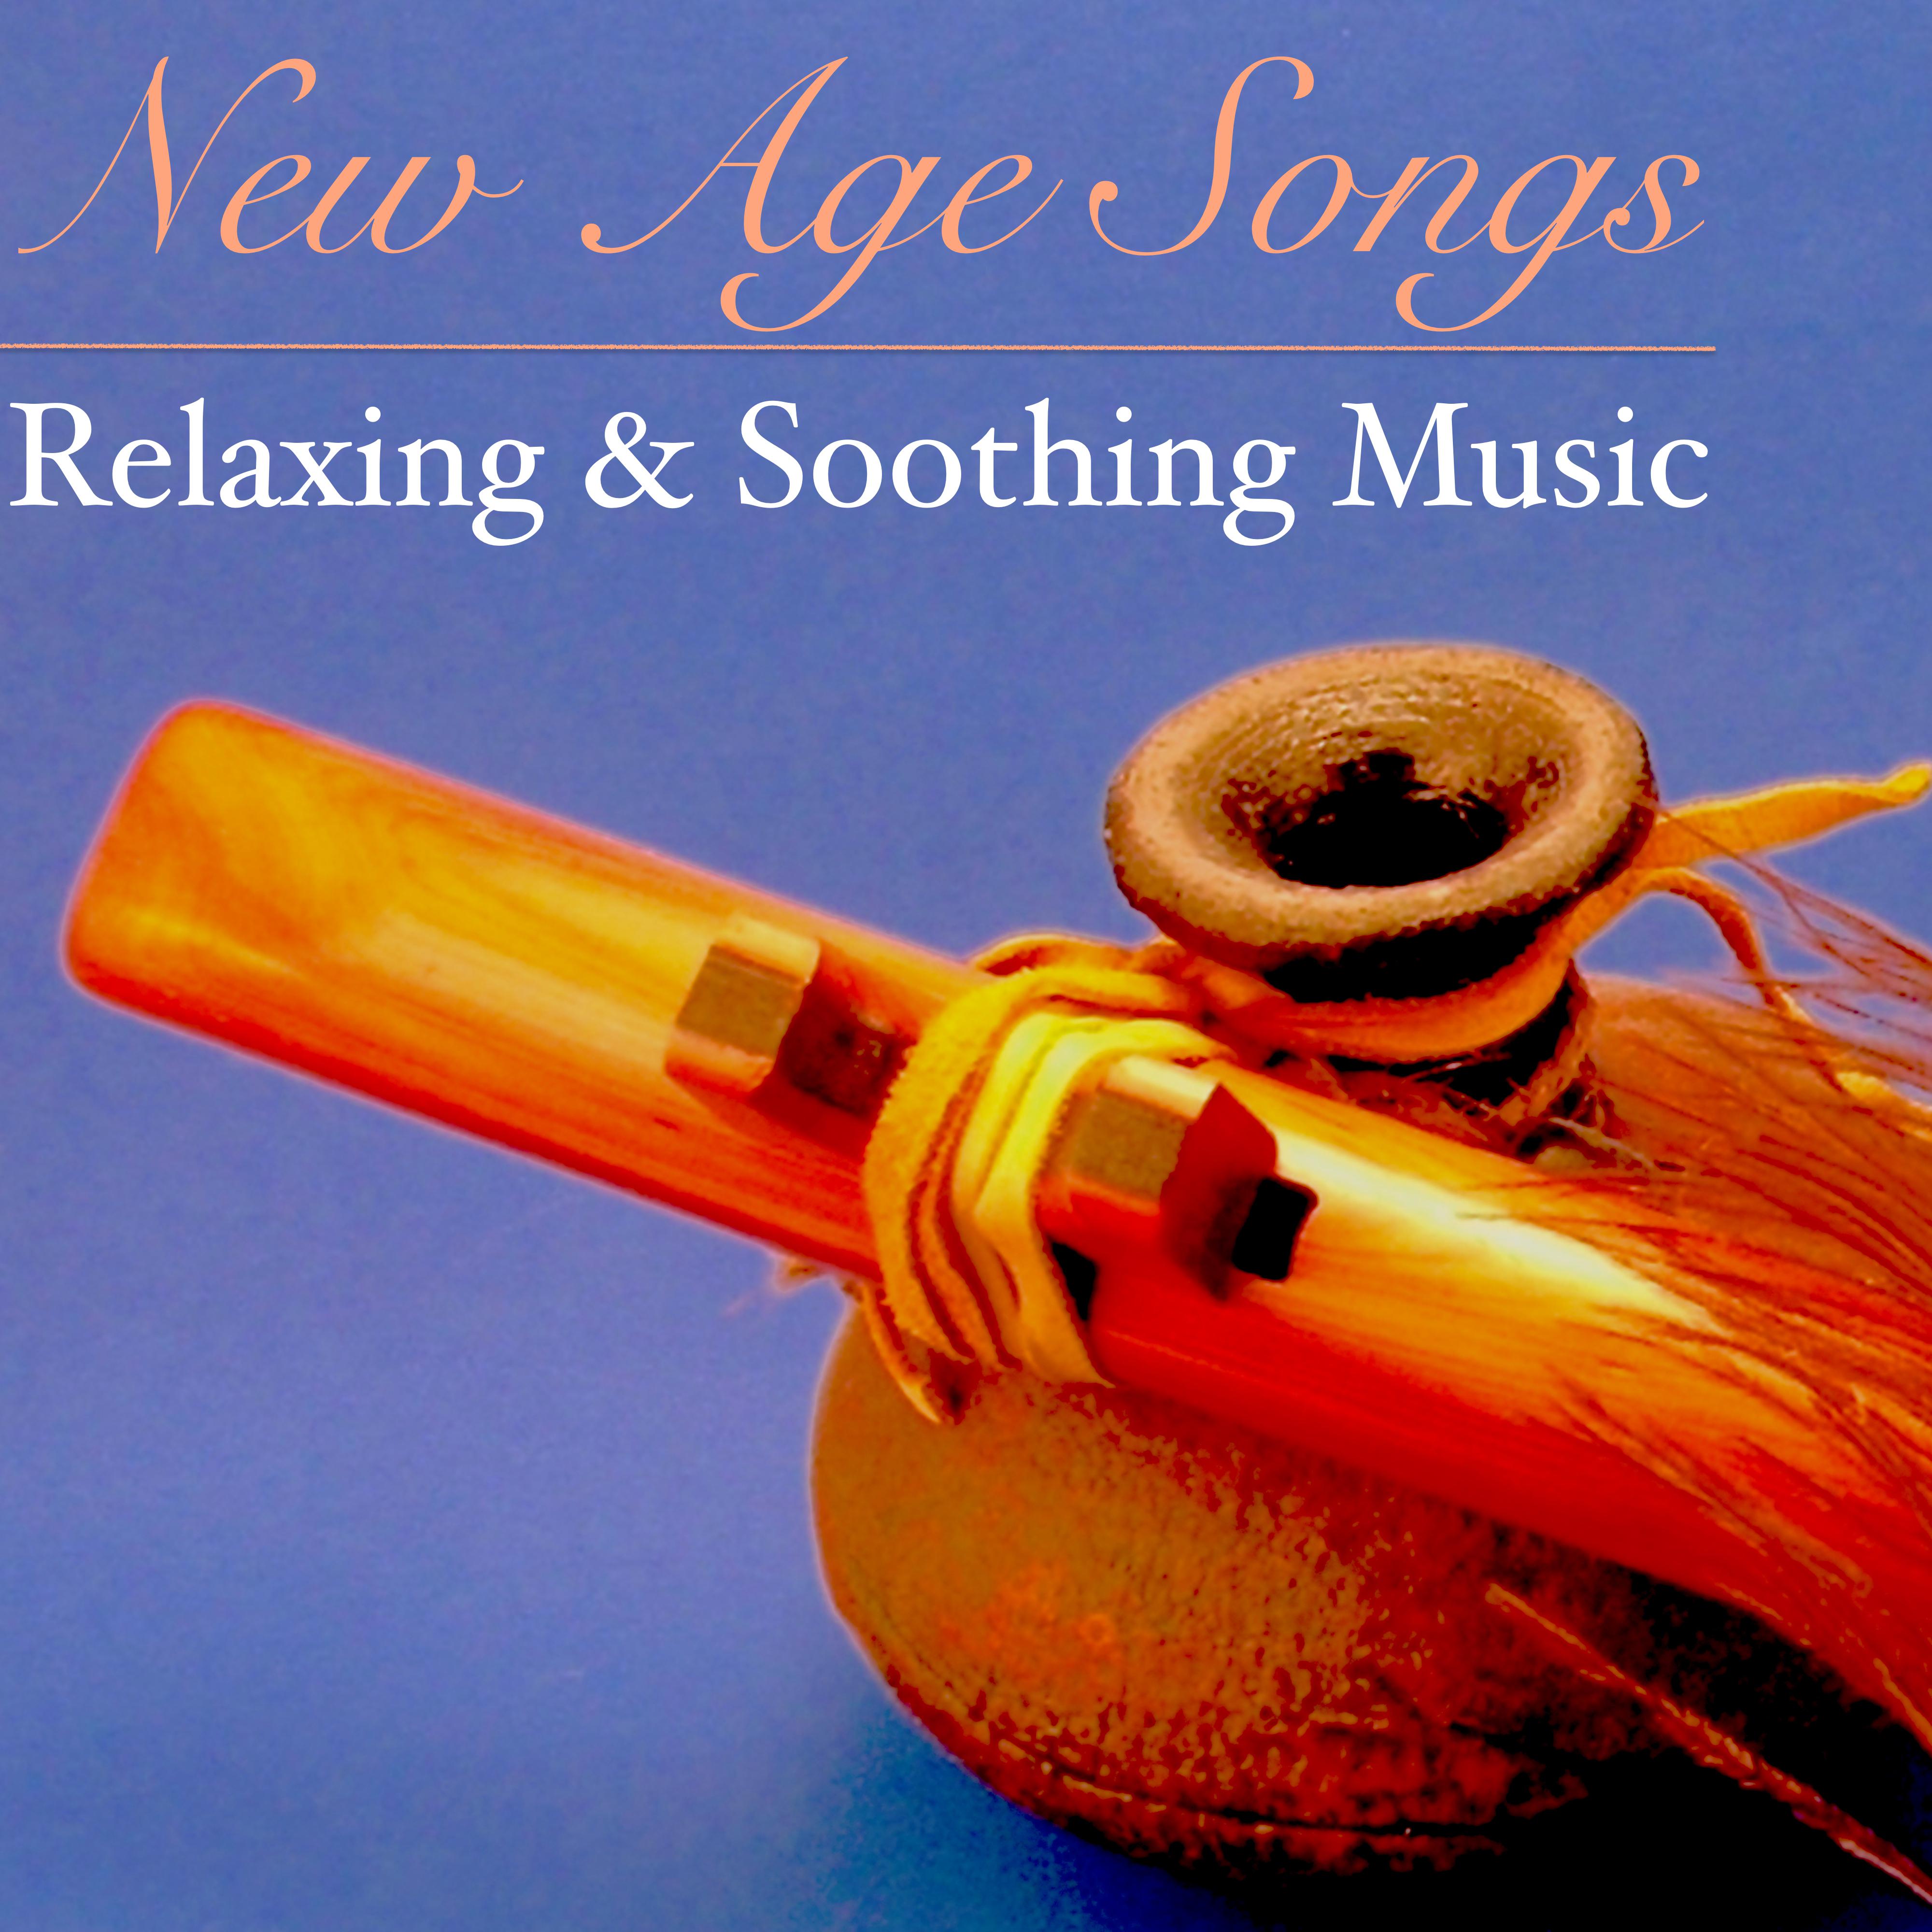 New Age Songs  Relaxing  Soothing Music for Deep Mindfulness  Zen Meditation, Yoga Morning Salutation for Complete Soul Healing  Rebirth, Music Therapy